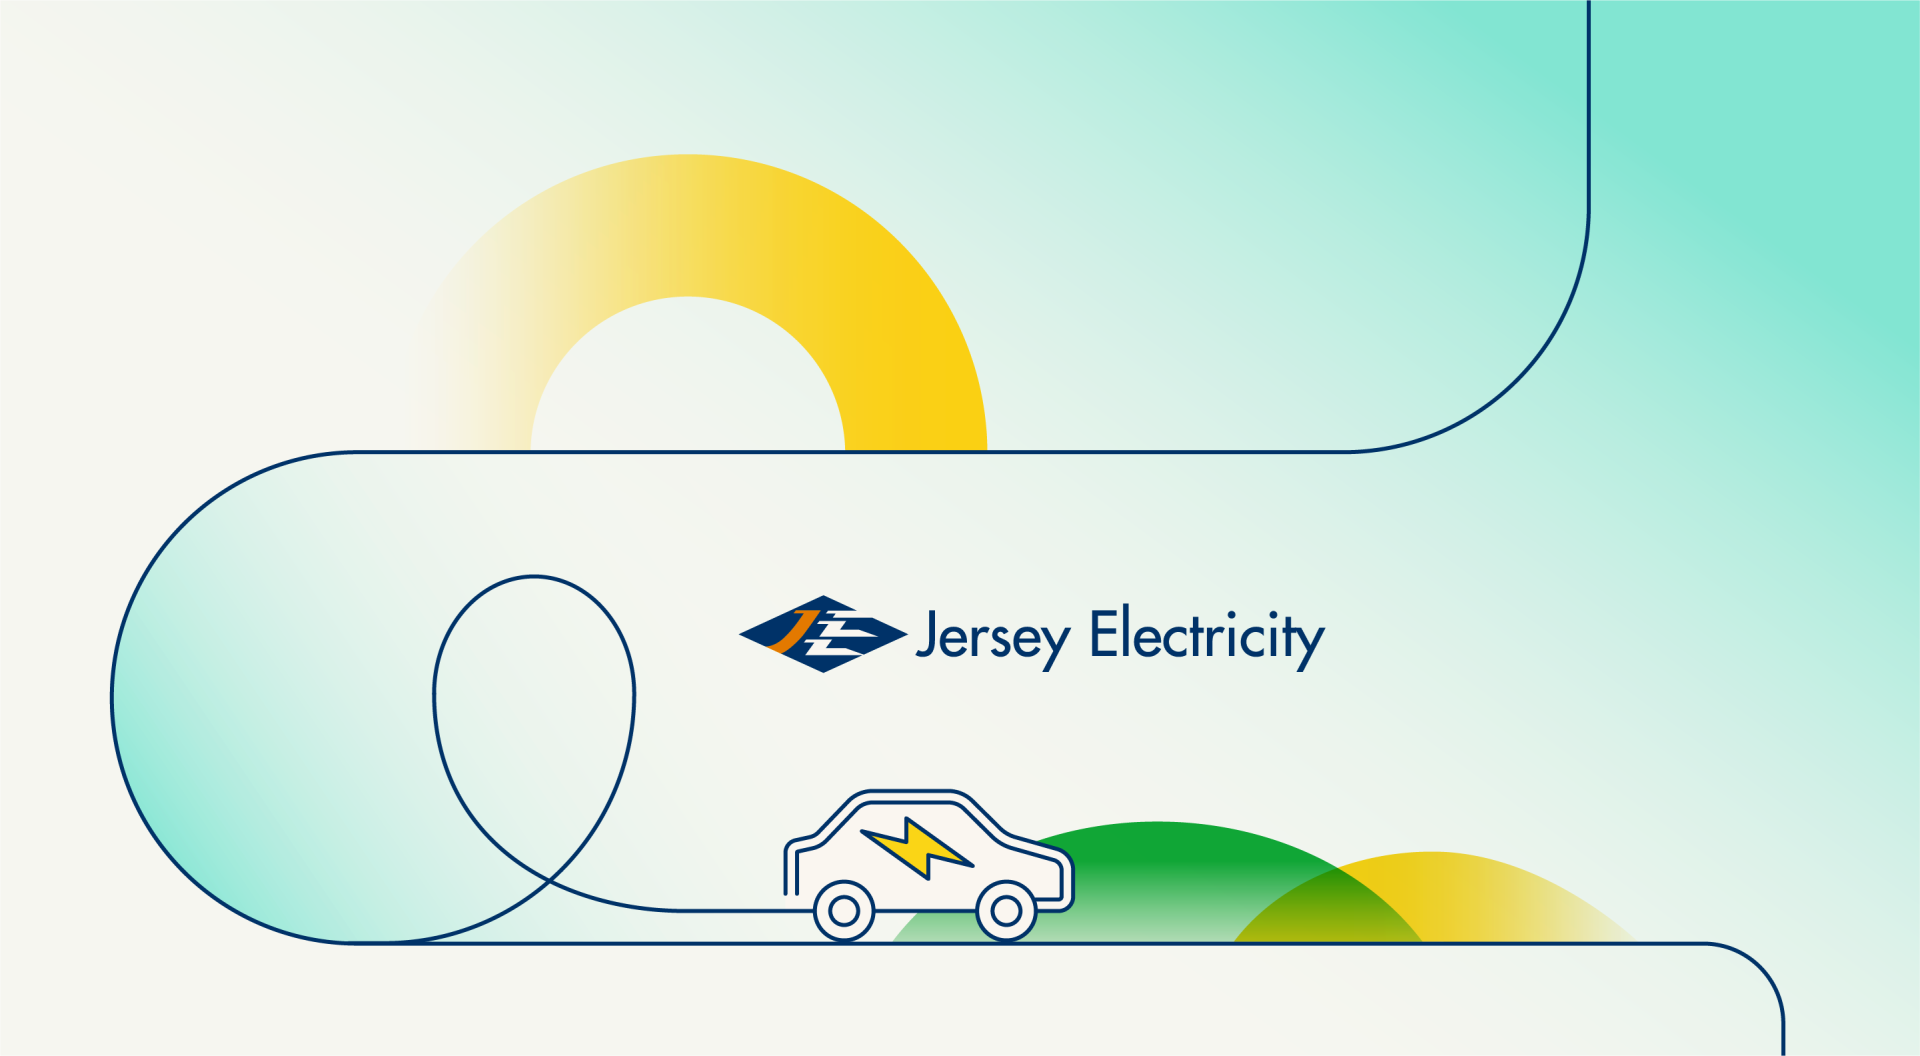 Illustration of an electric car with the Jersey Electric logo above it.